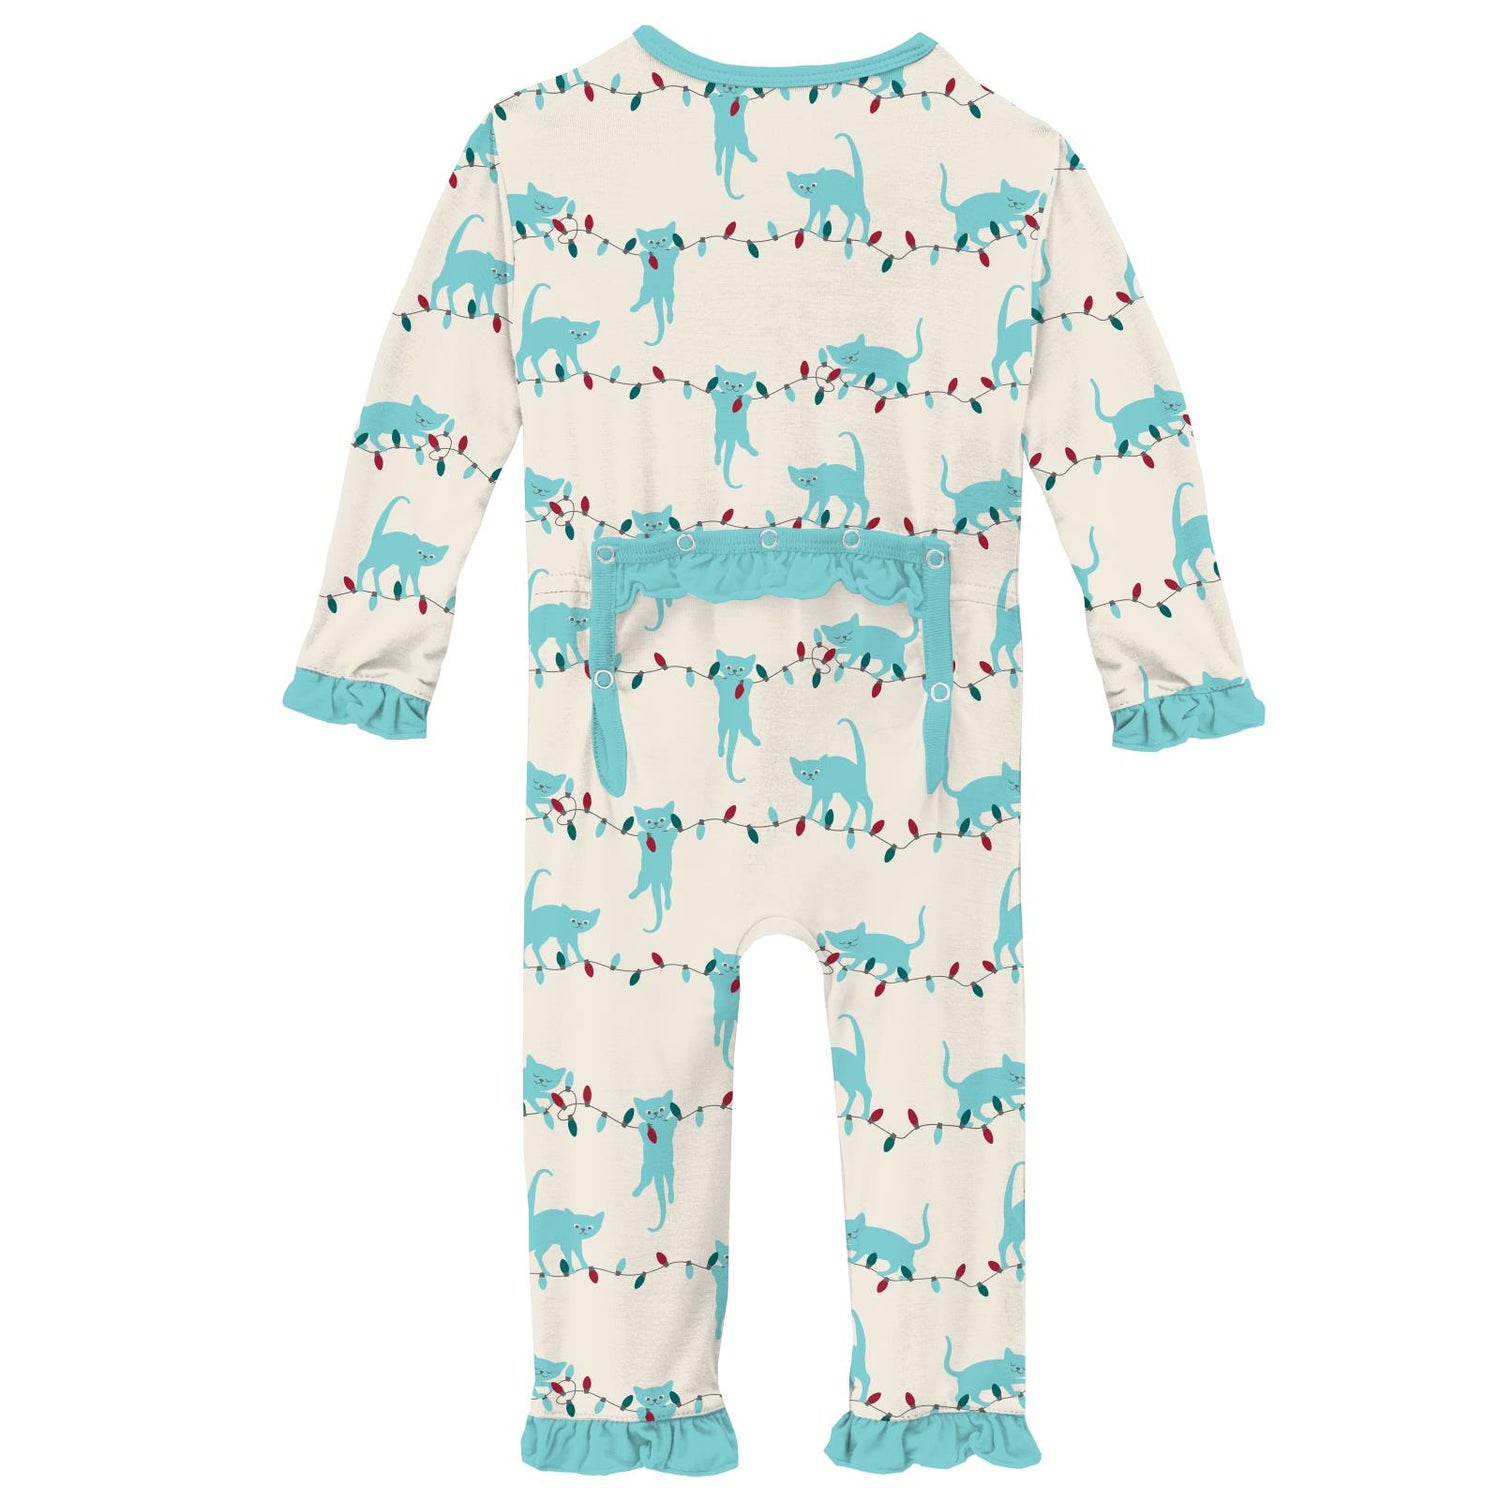 Print Classic Ruffle Coverall with Snaps in Natural Tangled Kittens